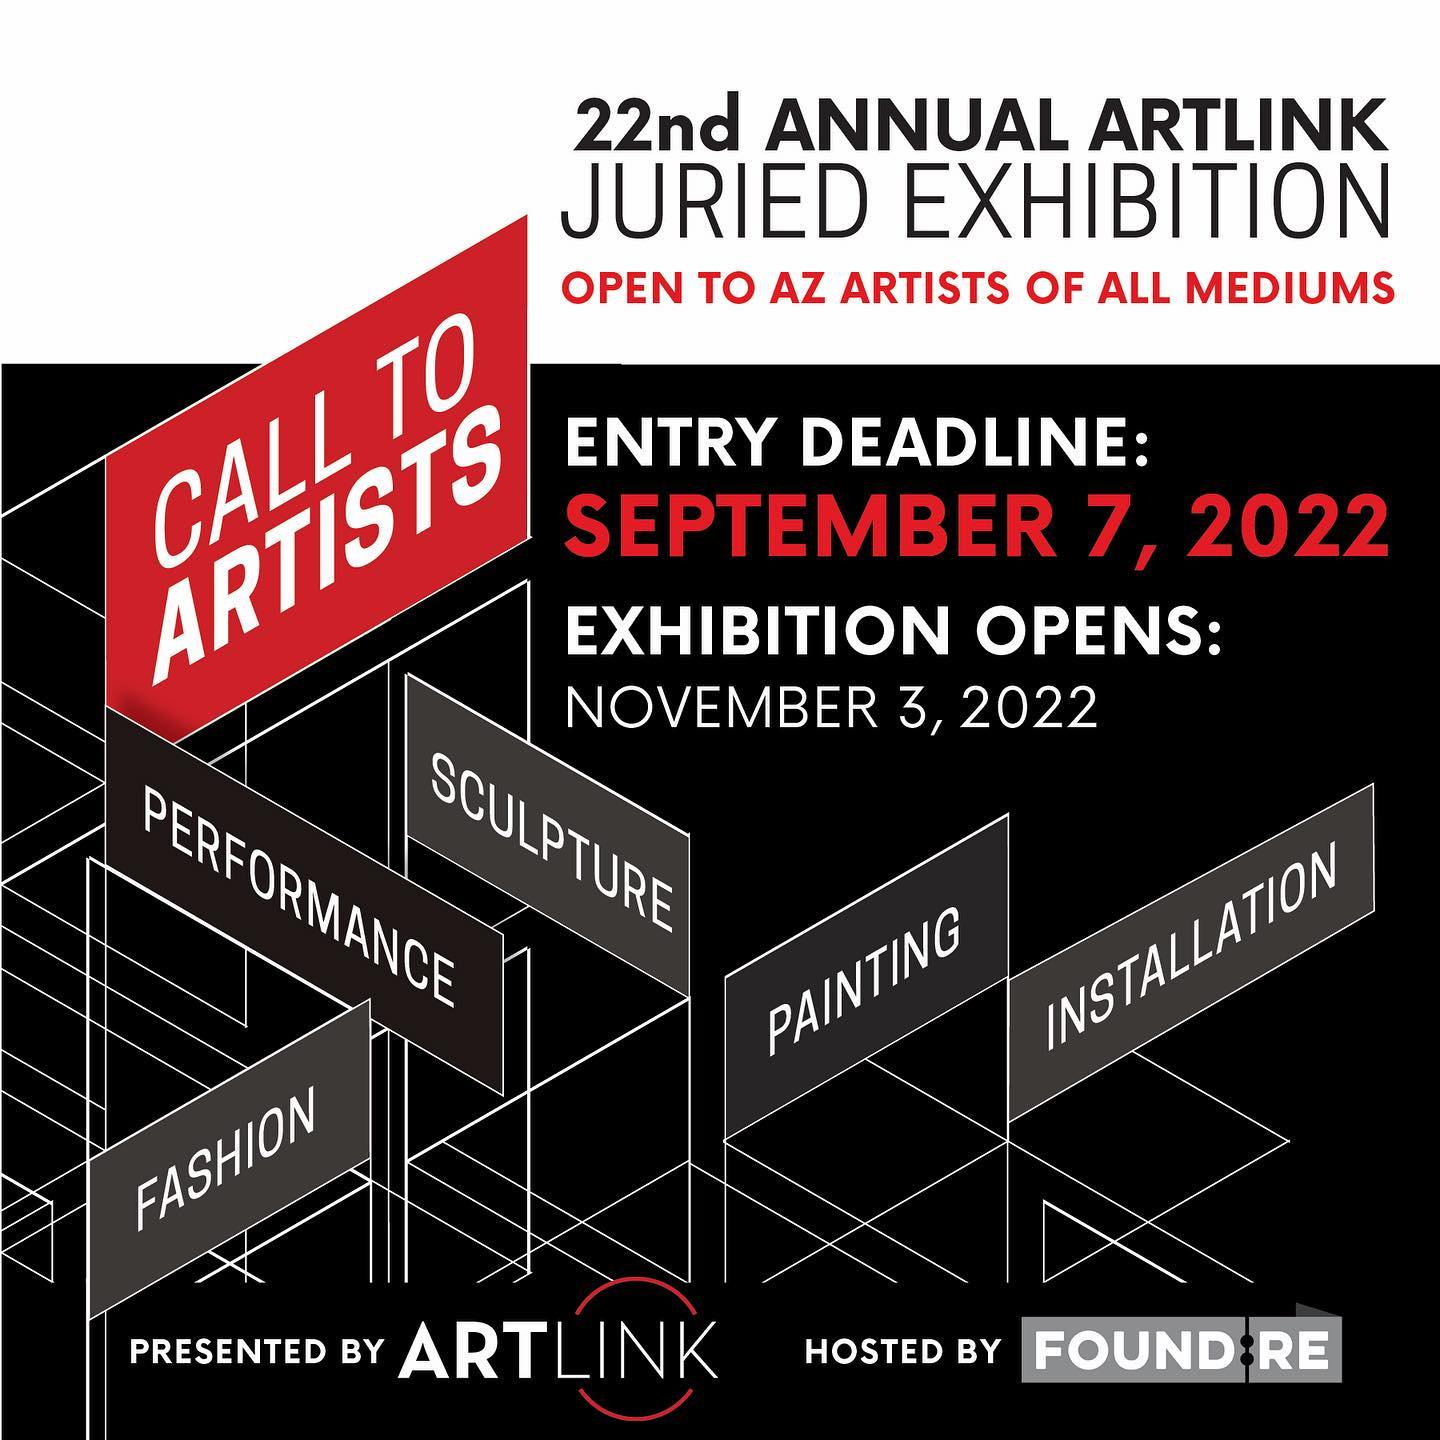 Artlink Inc. is pleased to announce the return of one of the largest exhibitions for emerging and established artists held in Arizona. The 22nd Annual Juried Exhibition will be hosted by FOUND:RE Phoenix Hotel as part of the FOUND:RE Contemporary Art Program. 

Thanks to this partnership, the 22nd Annual Artlink Juried Exhibition will be up November 3, 2022, through February 2023 ensuring that this multi-media extravaganza of painting, photography, sculpture, performance art and fashion design can be seen by everyone, including out of state visitors coming to Arizona for major sporting events. 

This is a call for existing work and is open to artists of all mediums including, but not limited to, oil, watercolor, acrylic, graphite, charcoal, pastels, photography, ceramics, printmaking, textile, mixed media, fashion, performance, video, and sculpture/three dimensional pieces. All selected artists will be eligible for awards. The works of selected performing artists will be scheduled on specific dates and times TBA.

The online submission deadline is September 7, 2022, by 5 p.m. Artists who have exhibited in the past are permitted to submit, but may not submit a piece included in any previous Artlink Juried Exhibition. 

All selected artists will be eligible for awards; first place $5,000, second place $1,500, third place $750.

As part of Artlink's mission of connecting artists, business and community; Artlink requires no entry fee for this annual premier showcase of Arizona artists.

Not all artwork will be accepted. Every submission is appreciated and will be seriously considered by a jury of experienced arts professionals. 

Learn more and submit here: https://artlinkinc.submittable.com/submit

#artlinkphx #foundre #artlinkphxjuried #artlinkjuried2022